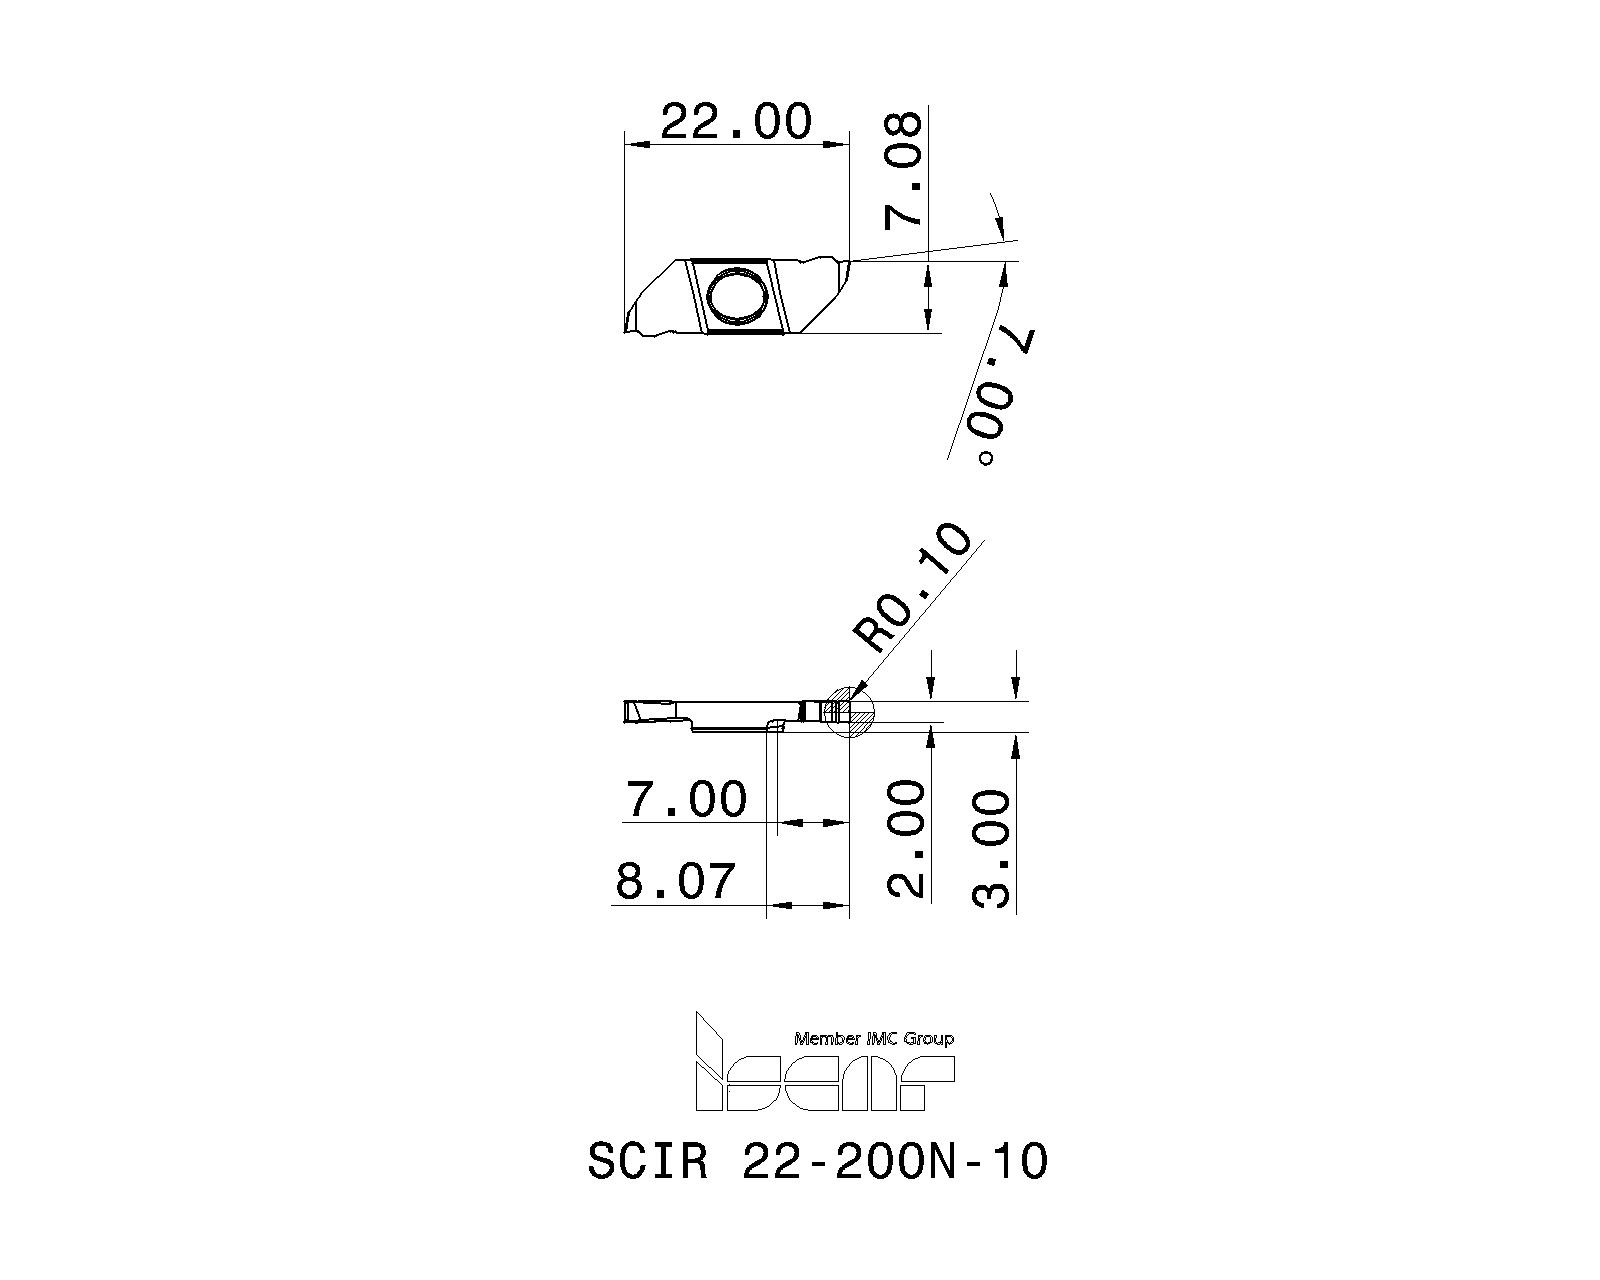 SCIR 22-250NP05 IC1008 